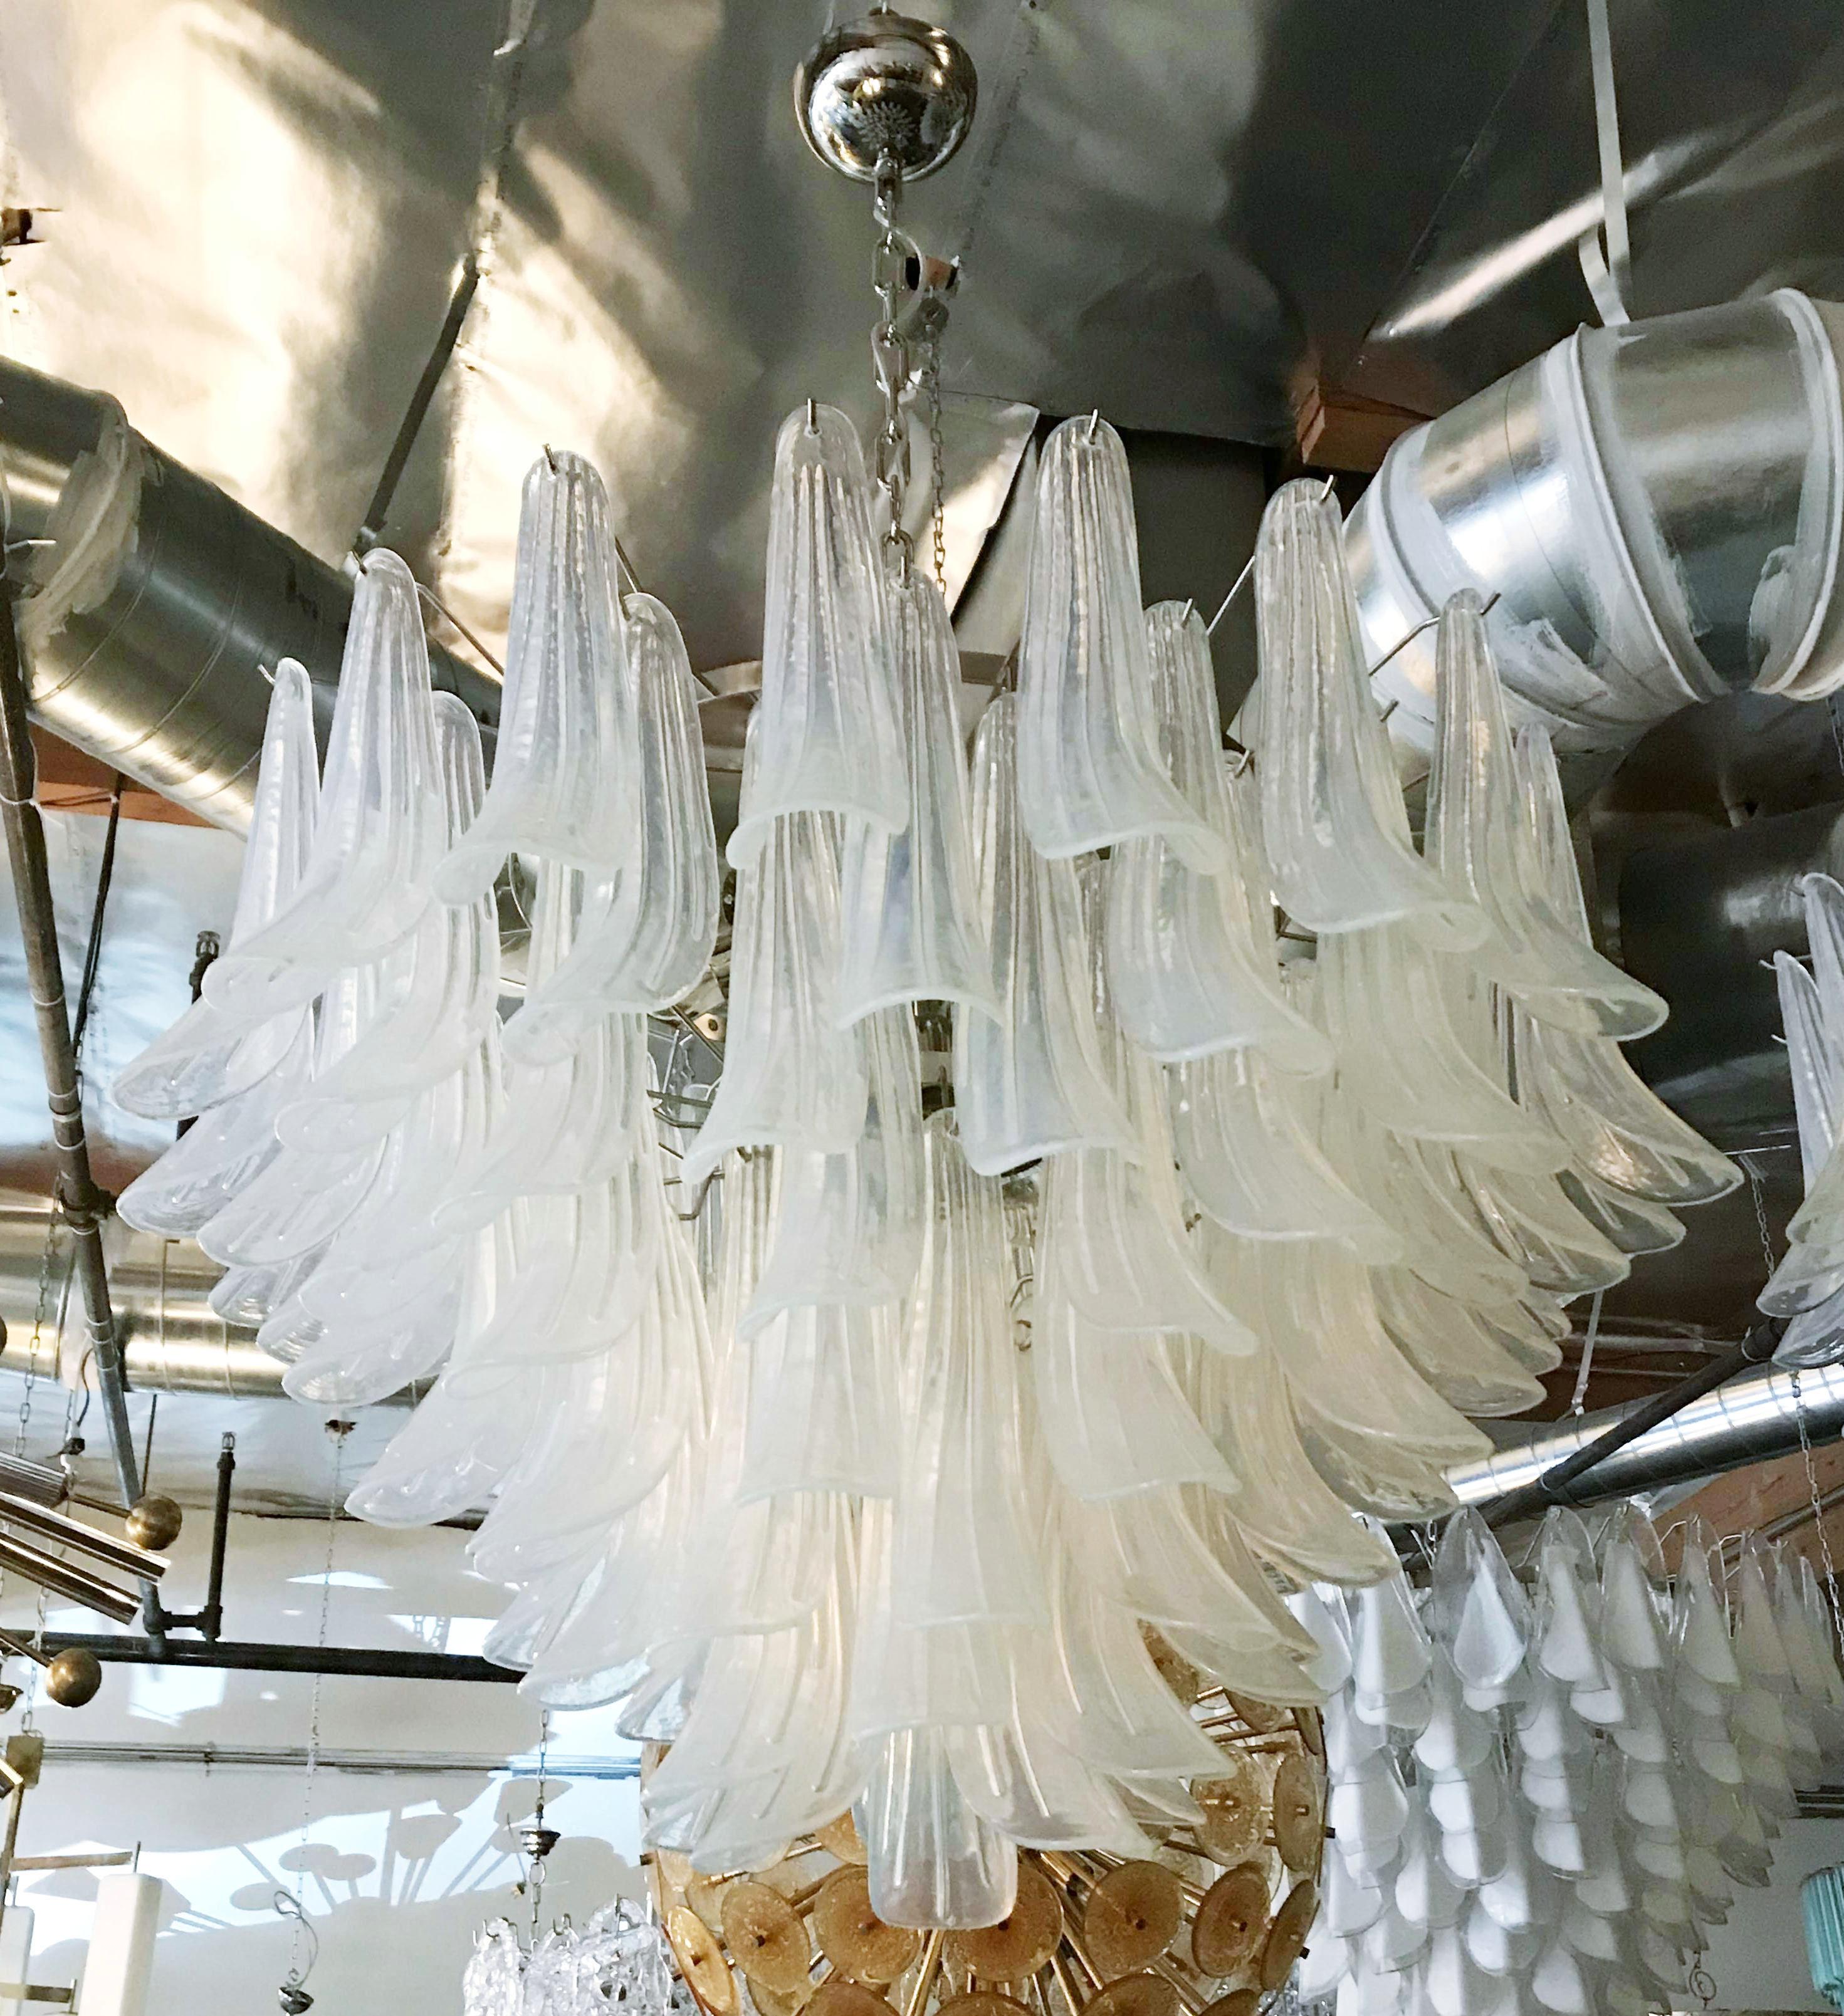 Italian chandelier with opaline Murano glasses hand blown into beautiful small saddles or leaves, mounted on nickel frame by Fabio Ltd / Made in Italy
13 lights / E26 or E27 type / max 60W each
Measures: Diameter 36 inches, height 25 inches plus